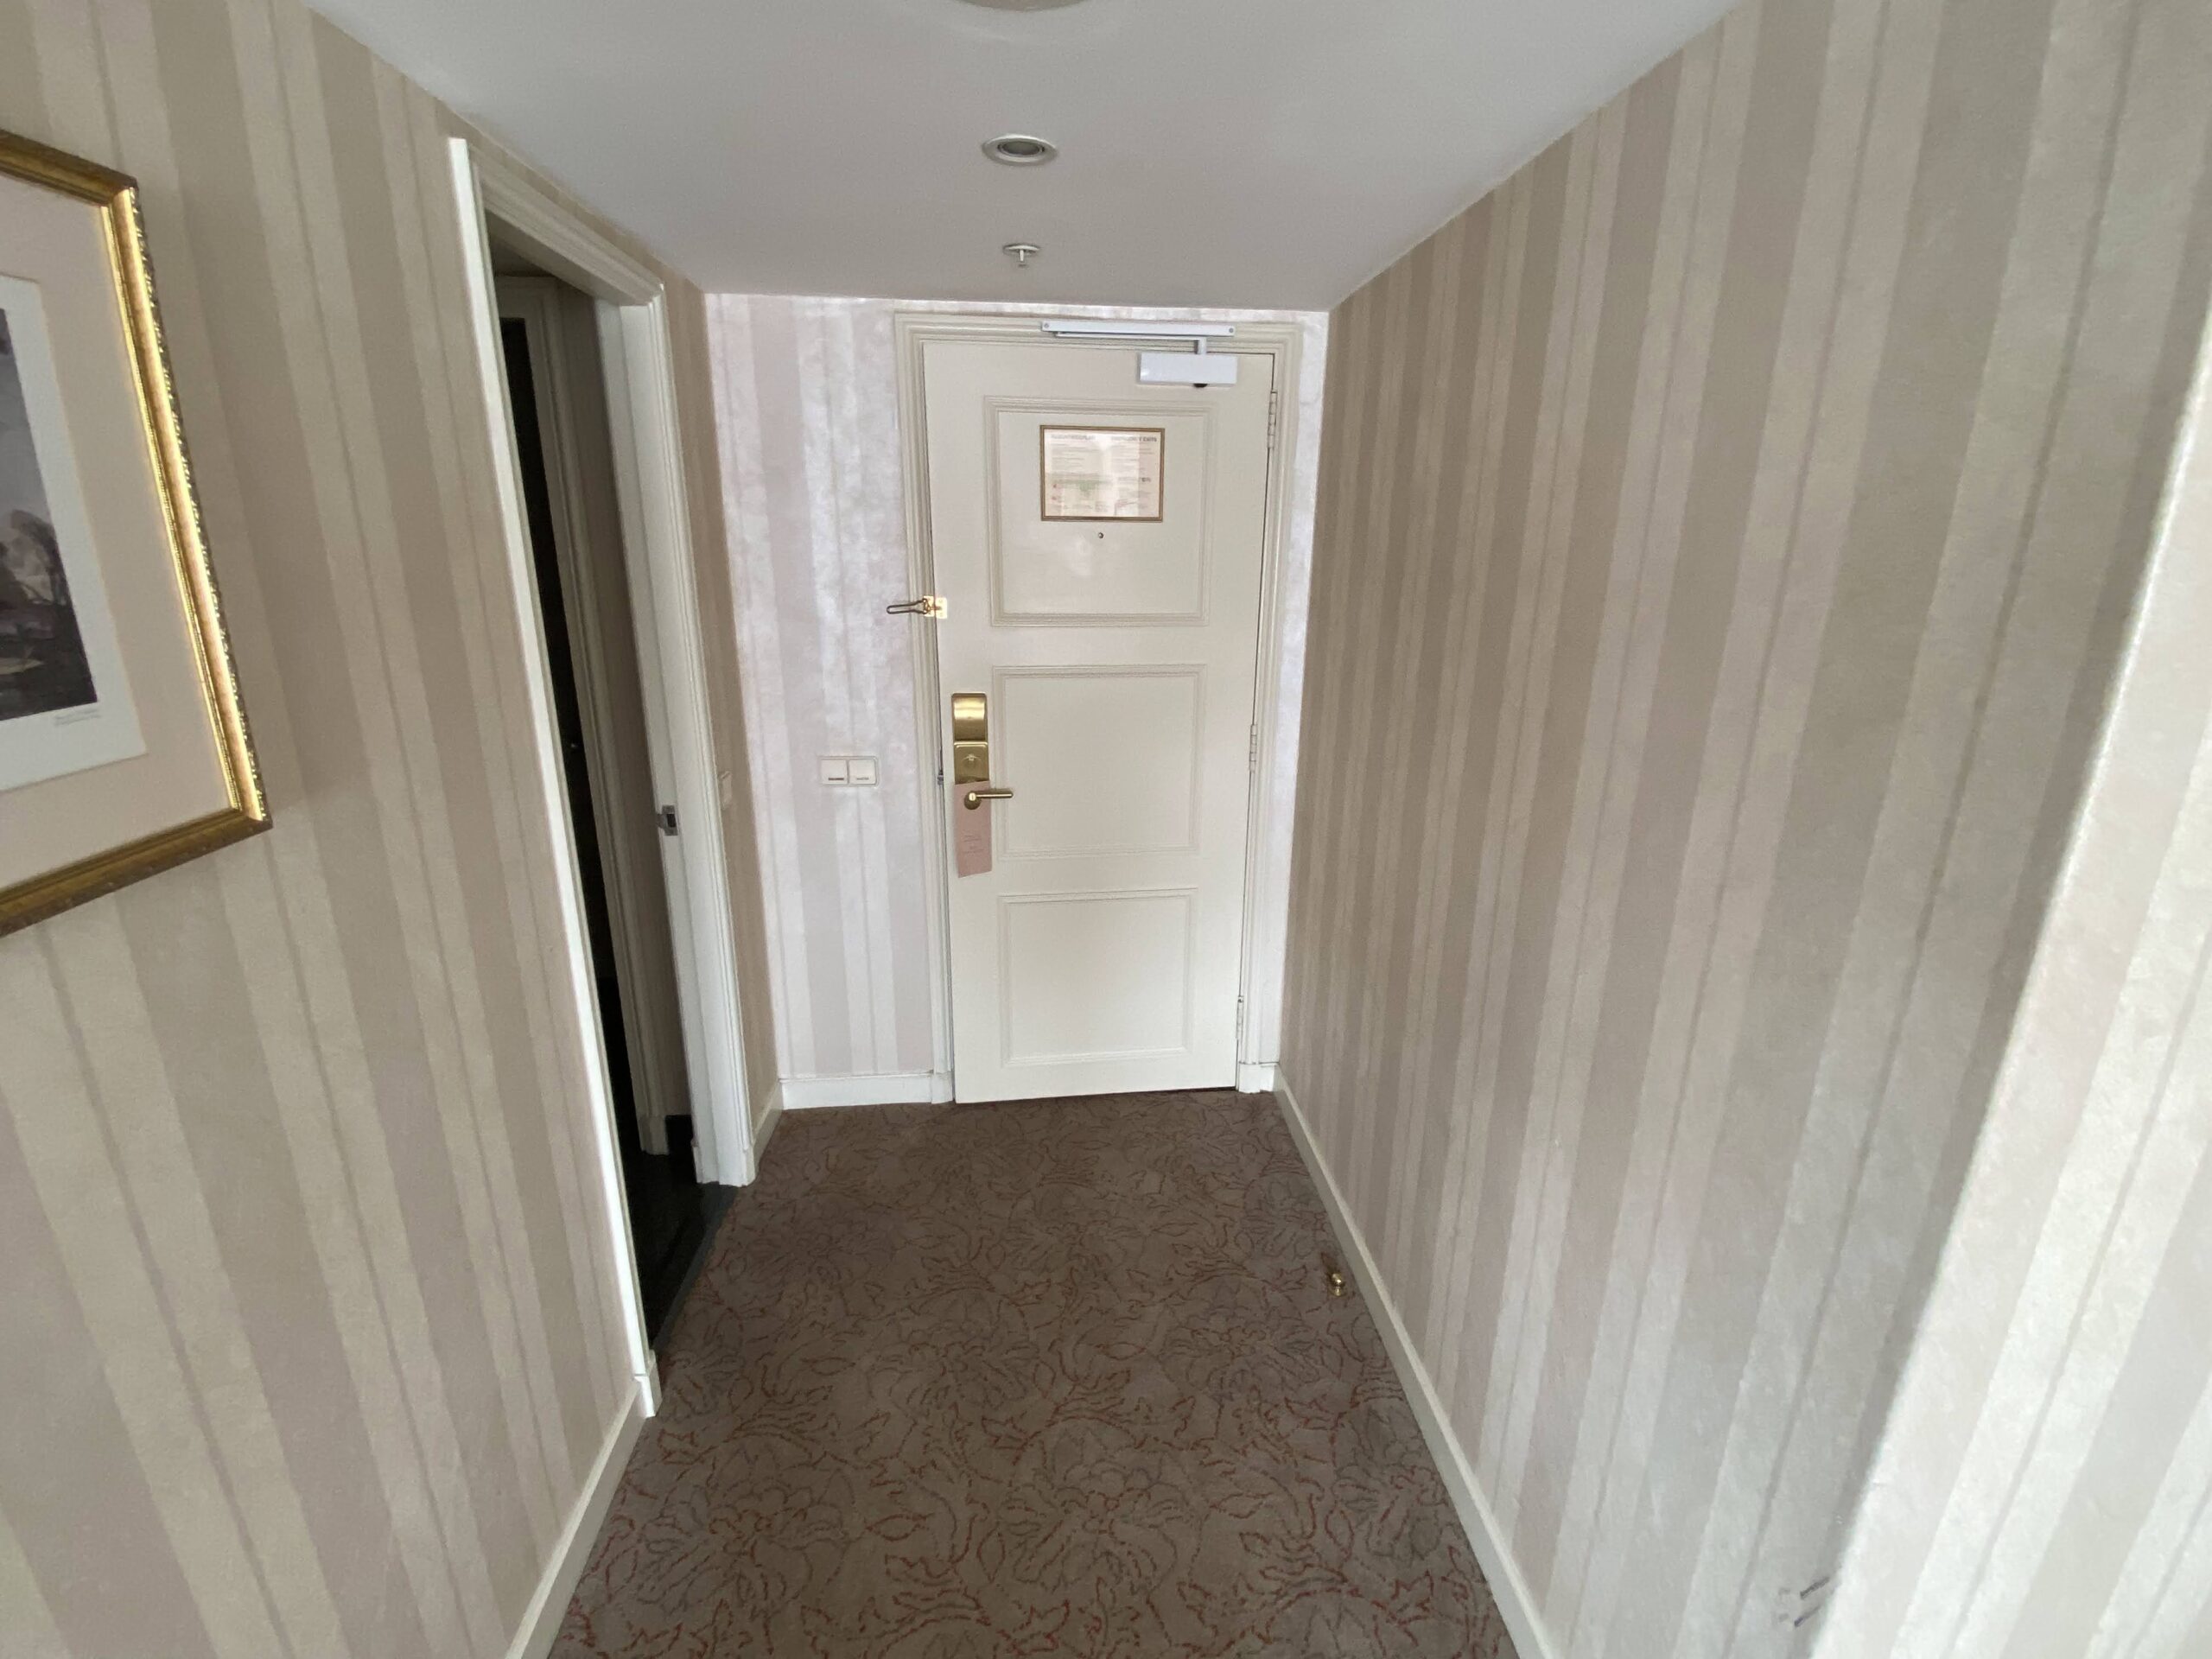 a hallway with striped walls and a door